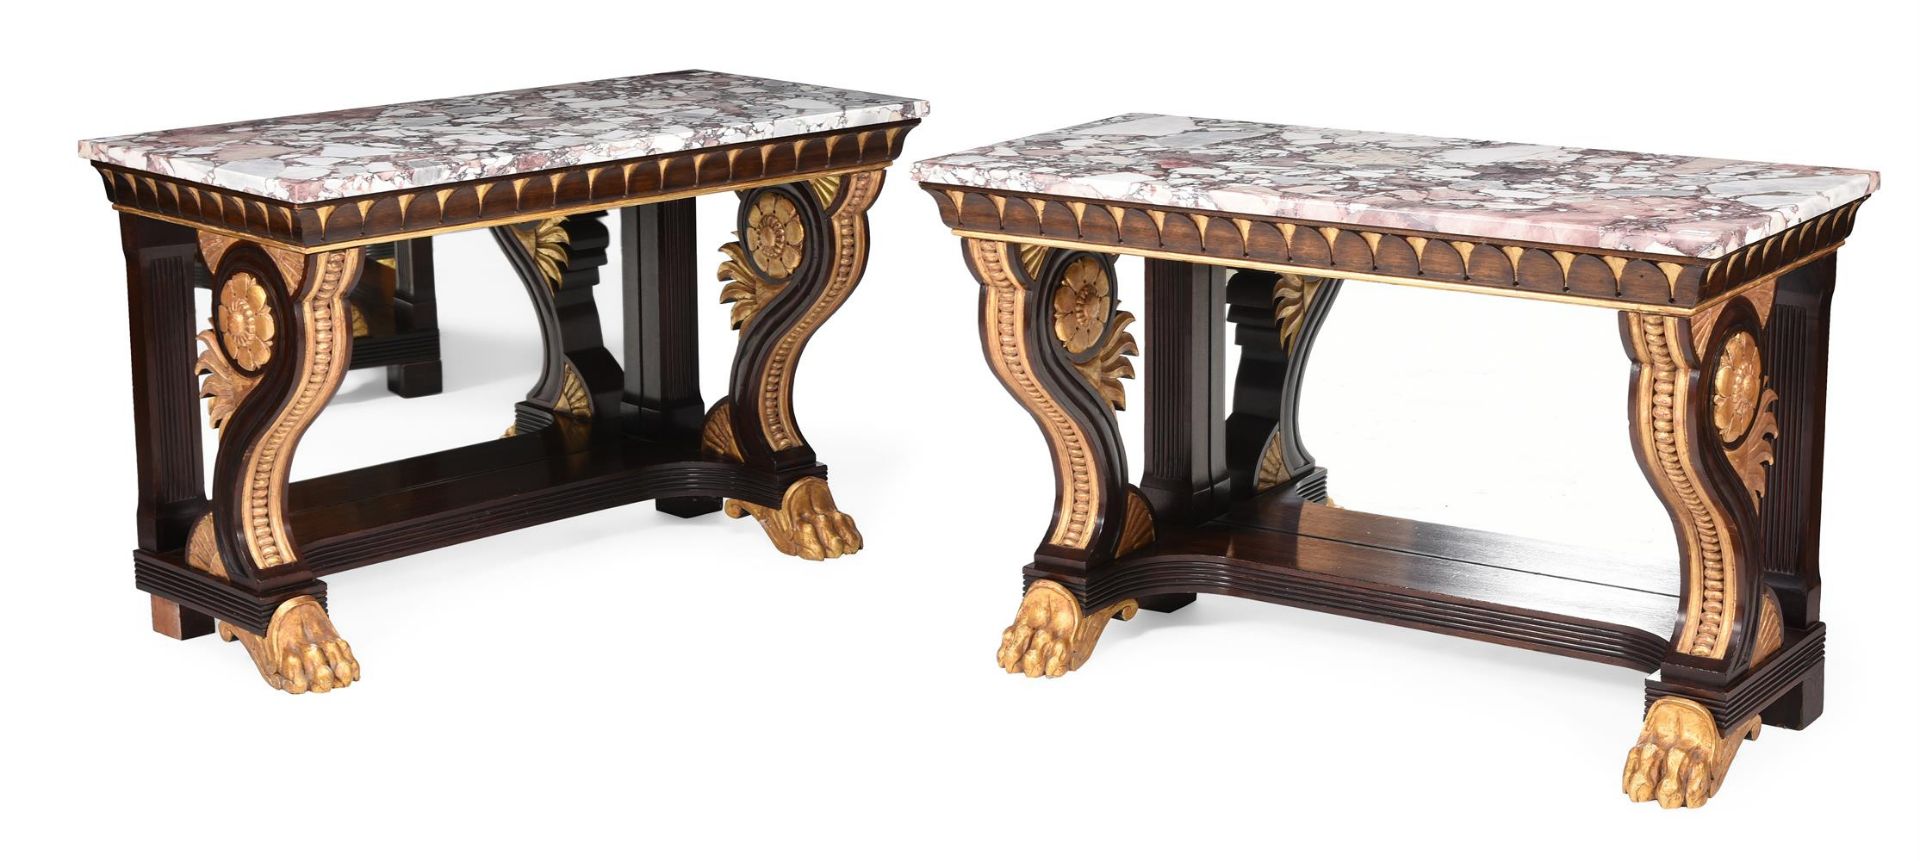 A PAIR OF SIMULATED ROSEWOOD AND PARCEL GILT CONSOLE TABLES IN REGENCY STYLE